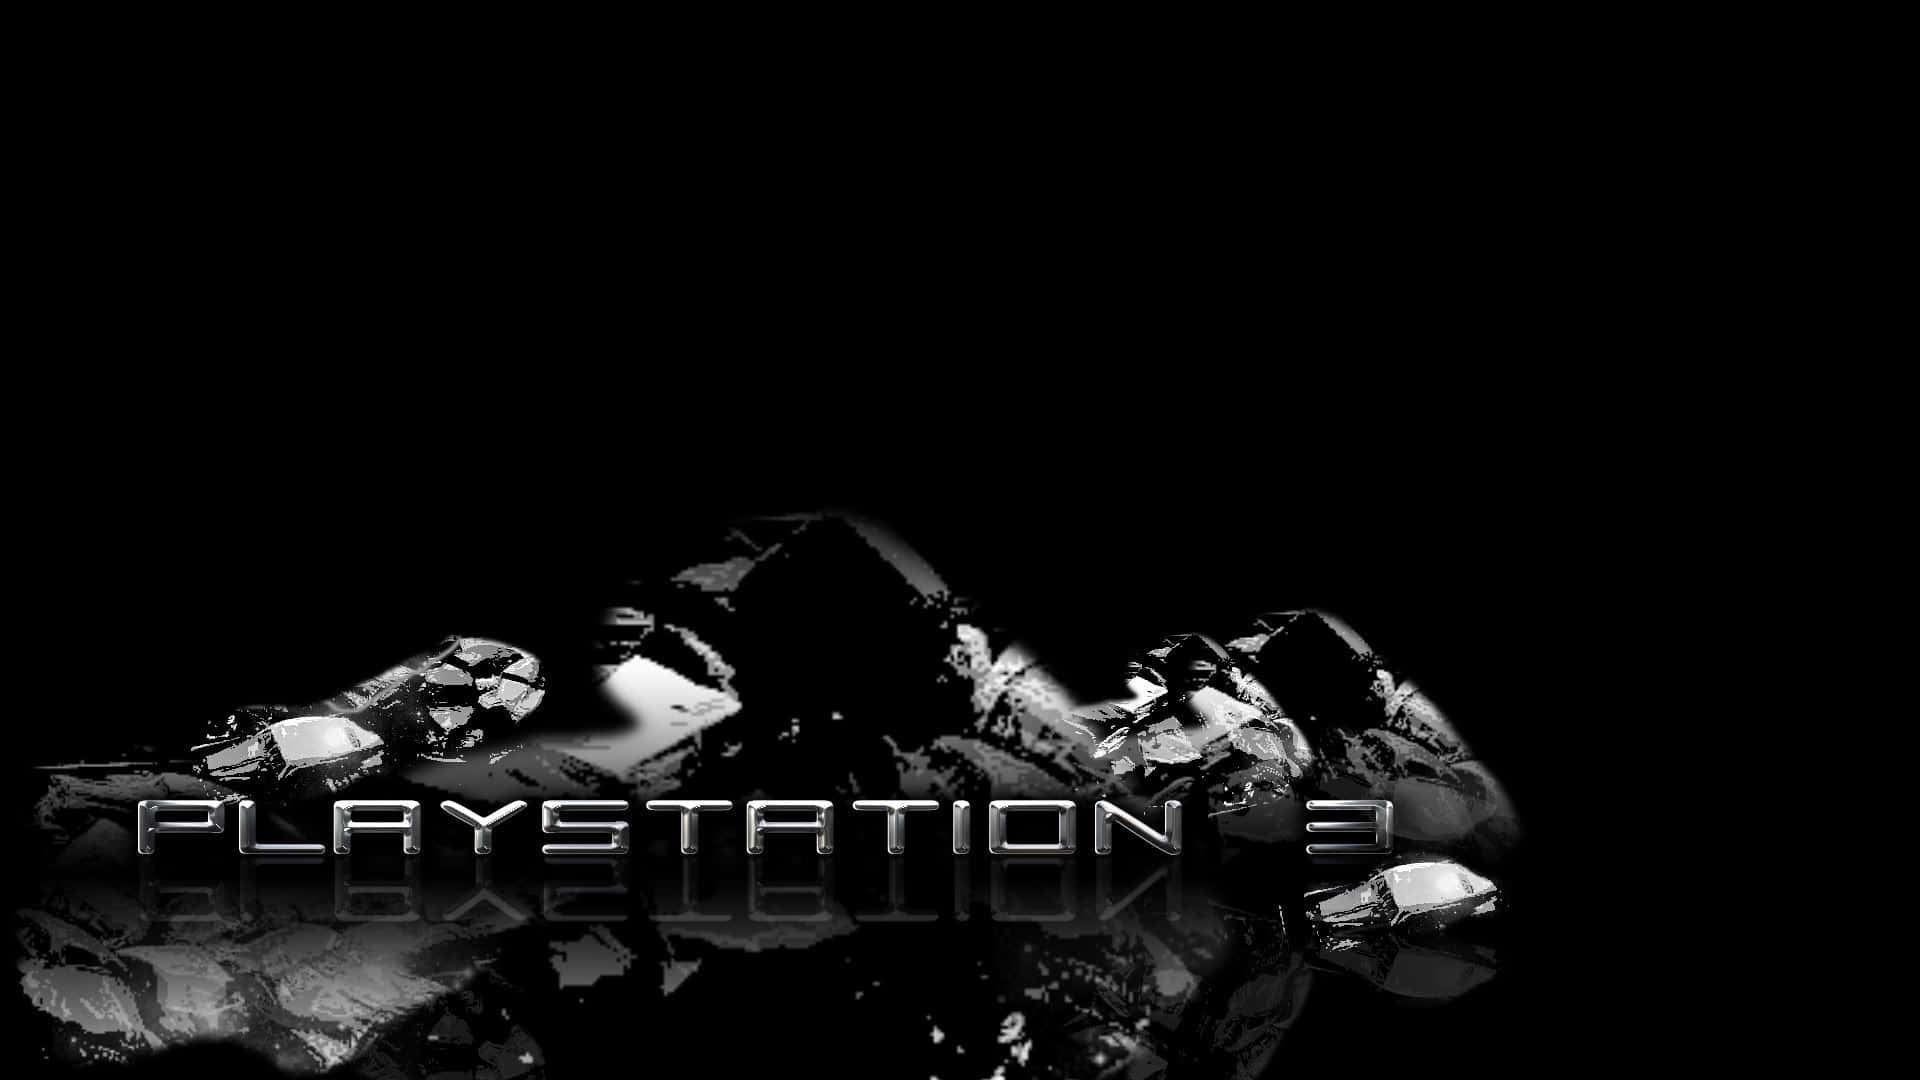 Free download Playstation 3 Wallpaper Hd 53871 for Desktop Mobile   Tablet 1920x1080 49 PS3 Backgrounds Wallpa  Hd wallpaper Playstation  Ps vita wallpaper